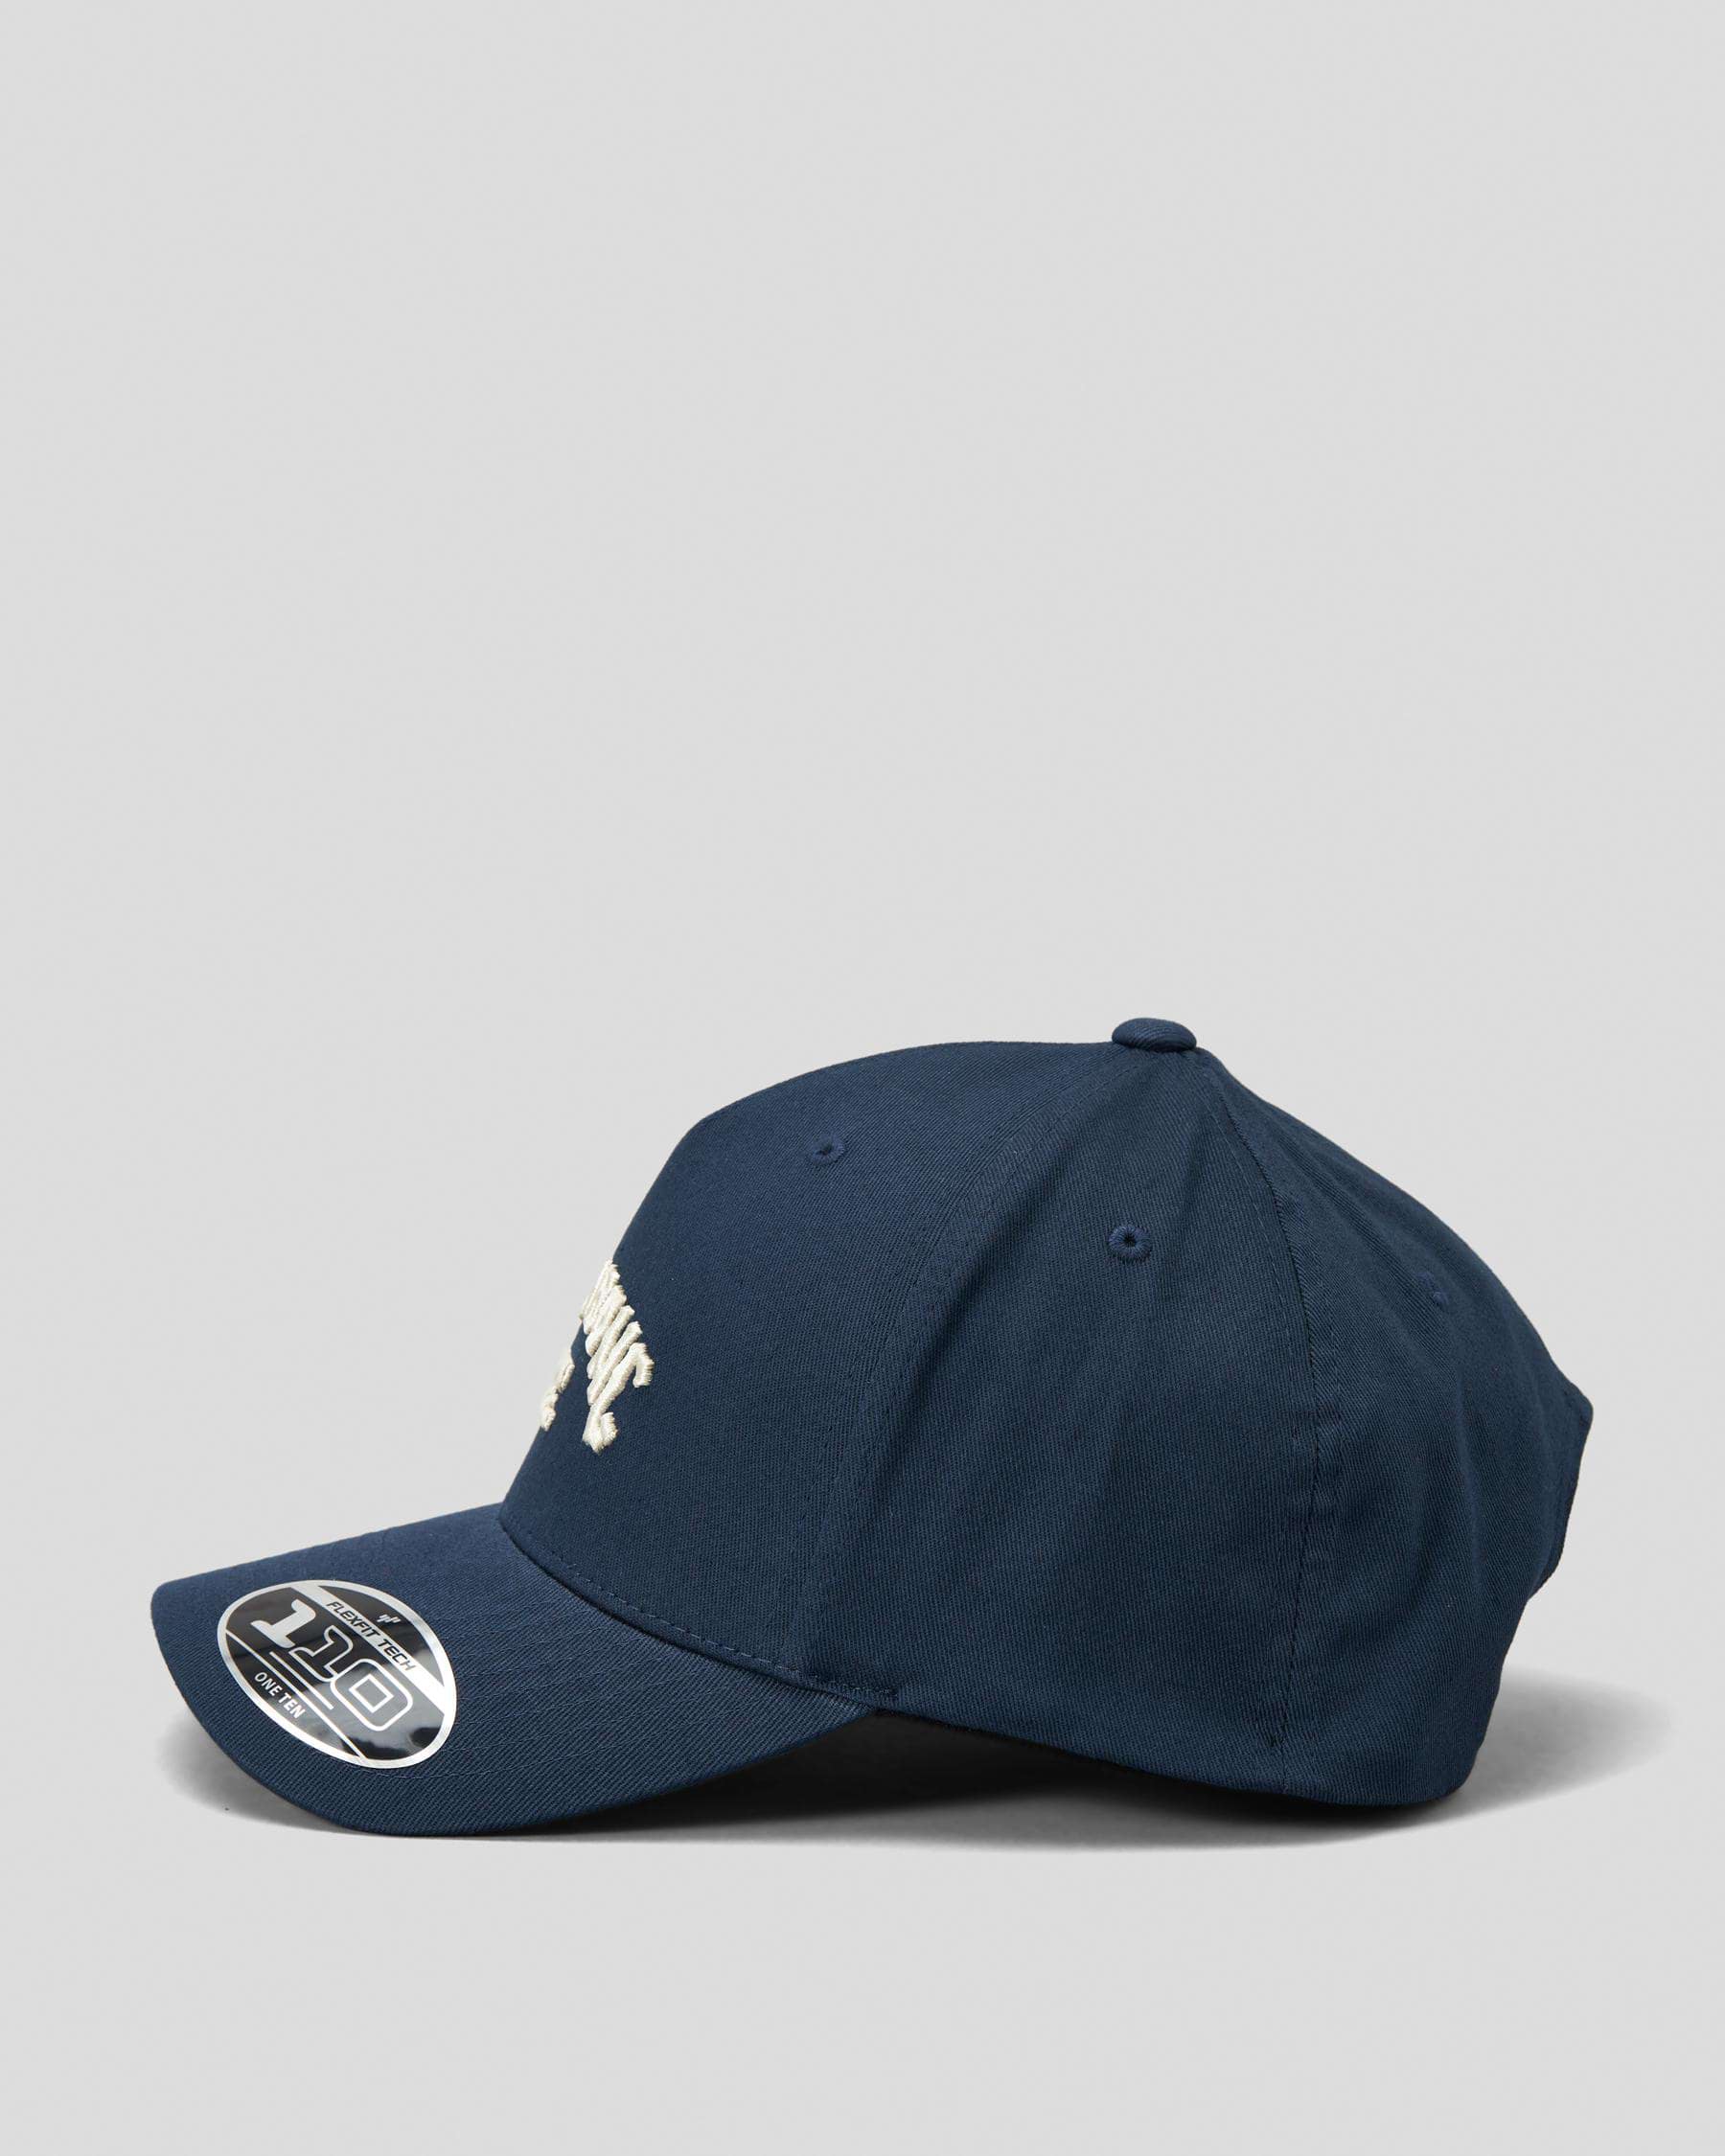 Billabong Arch Flexfit 110 Snapback Cap In Navy - FREE* Shipping & Easy  Returns - City Beach United States